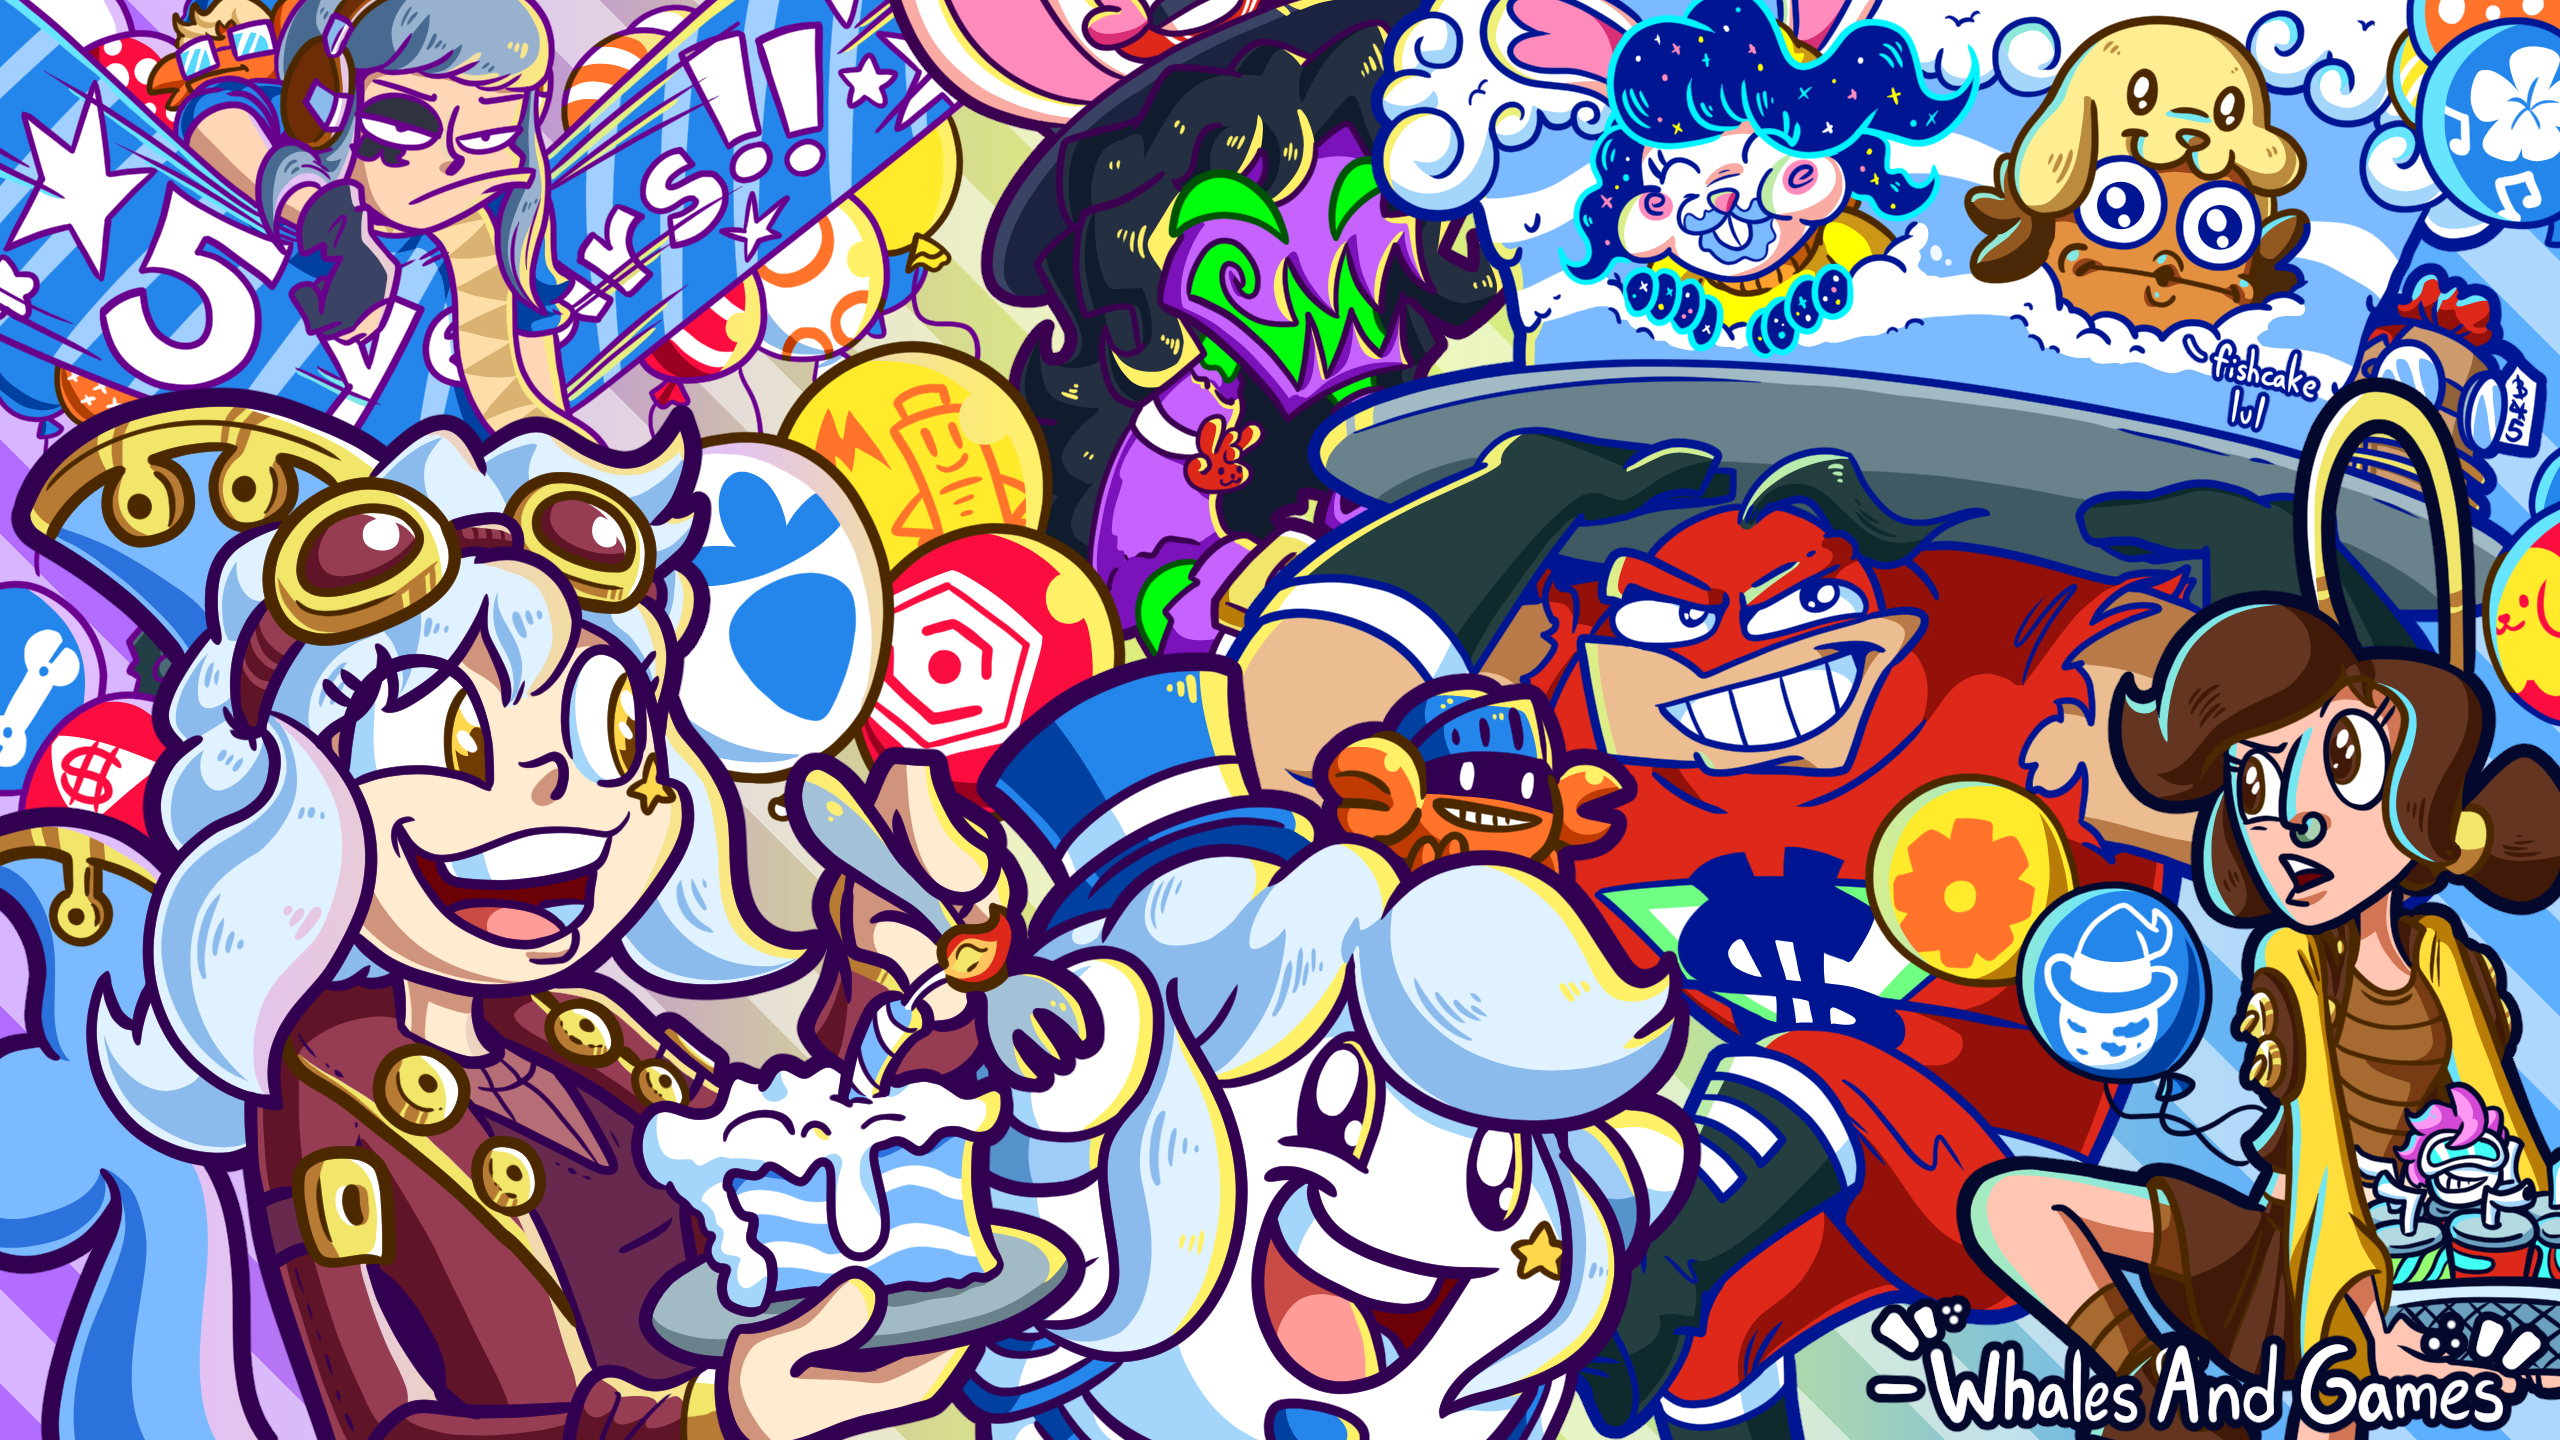 Happy 5th Anniversary, Whales And Games! Characters in the picture are dressed as different characters from the Whales And Games universe of games. Whalechan is dressed as Cptn. Jawline from Townseek, while Dapperchan is stuck on a banner reading 5 Years dressed as Arte from Art Fight Duel. Polite Whale is dressed as Whalechan's normal outfit, while Crabpin is standing on his head with Glade's Helmet from Colossorama. Glade is dressed as Monetisation Man from Super Sellout. Glade is holding a blue cake, which had Thothev from Vast Trivia of the Void dressed as Cheqmate from Whipped And Steamy, Buns Buns dressed as Astra from Starsnap, and Dapperfish as Hoop from Woofice Chair. Finally, Caffie from Whipped And Steamy is dressed as Jazzy from Jazzy Beats.